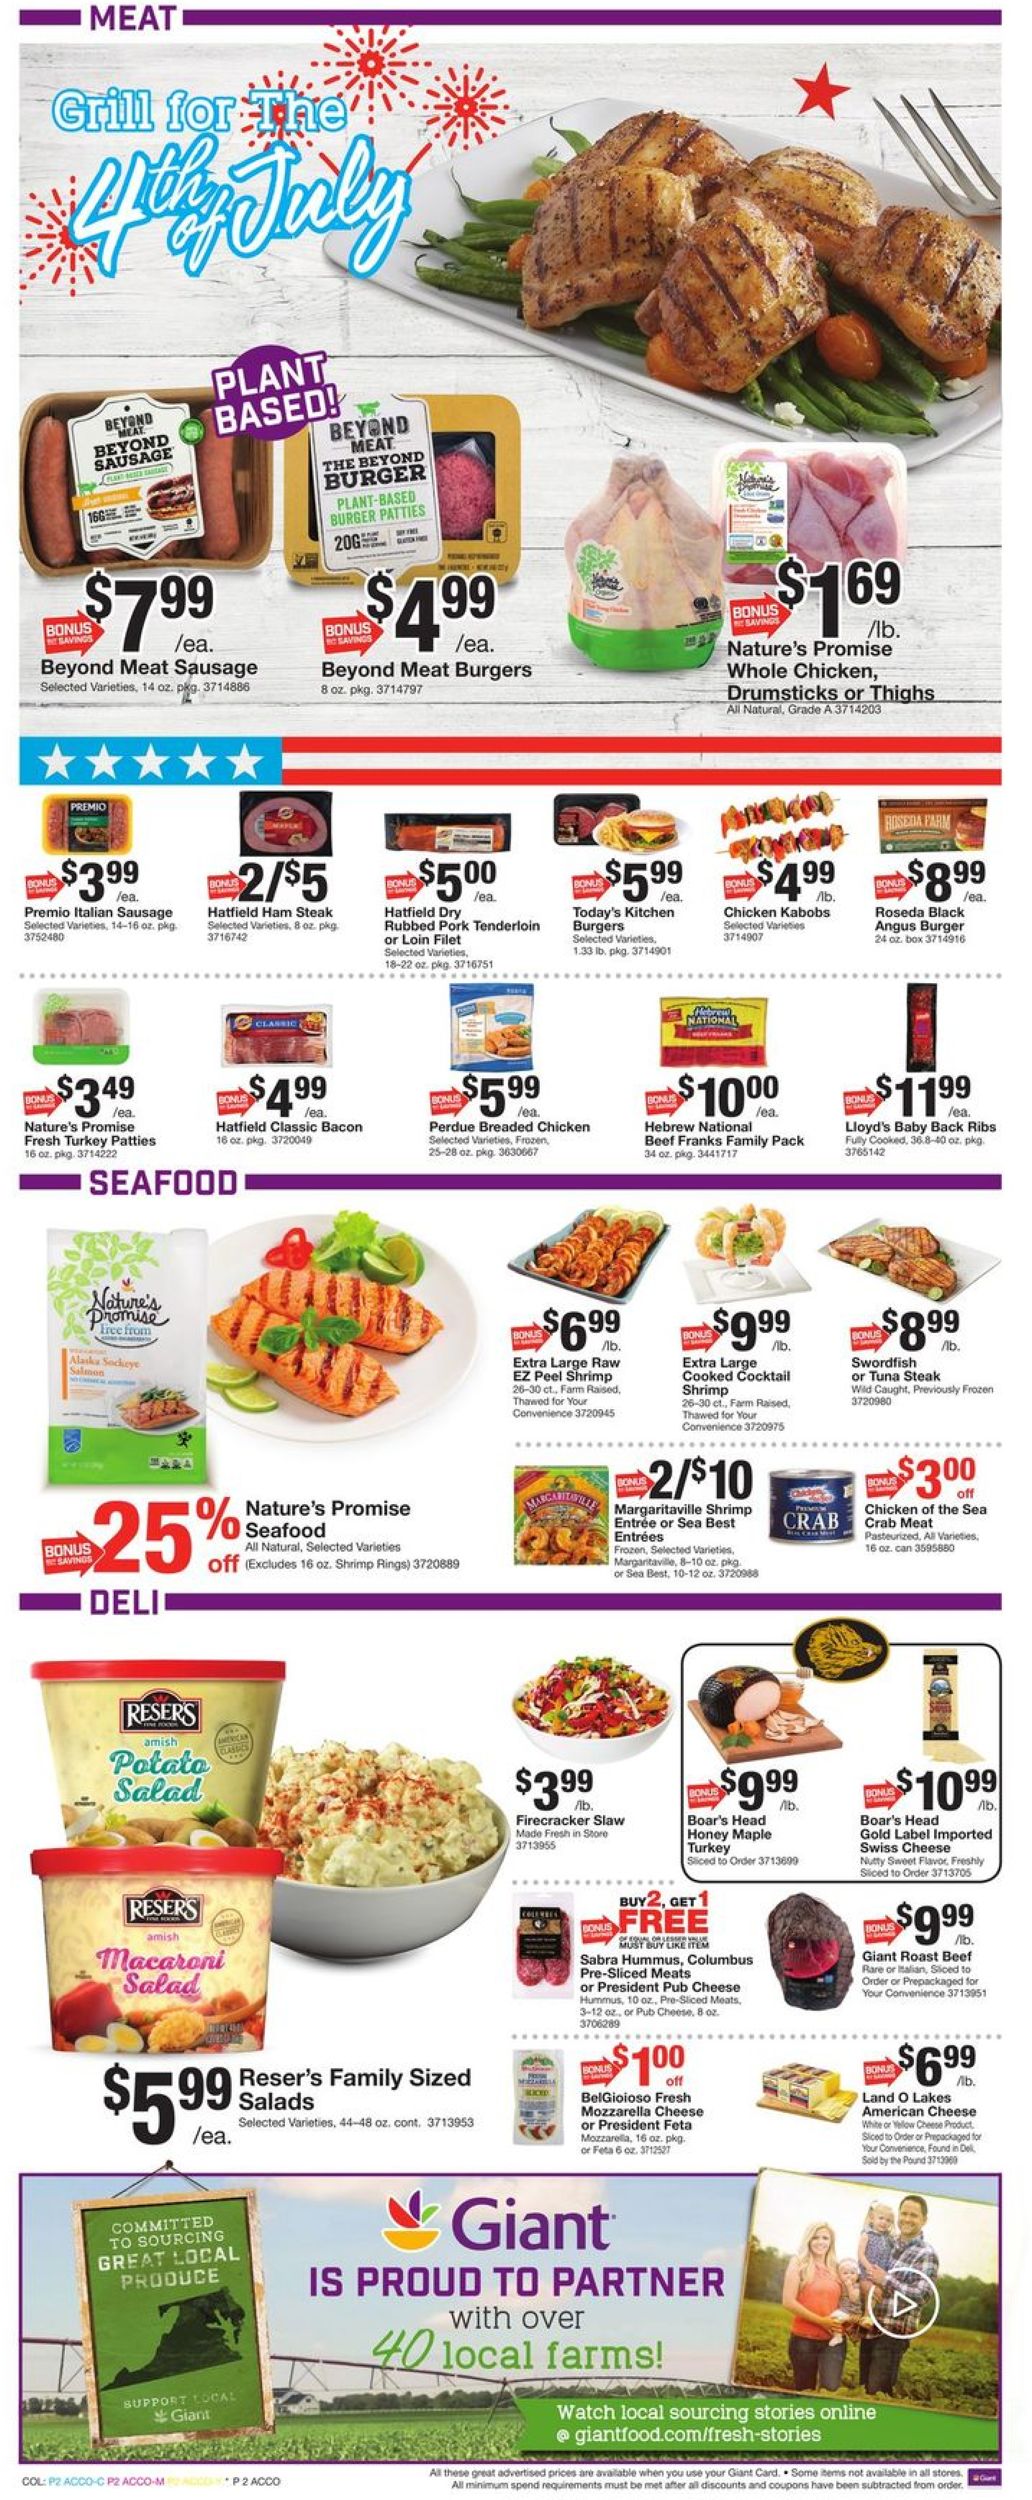 Catalogue Giant Food from 06/28/2019